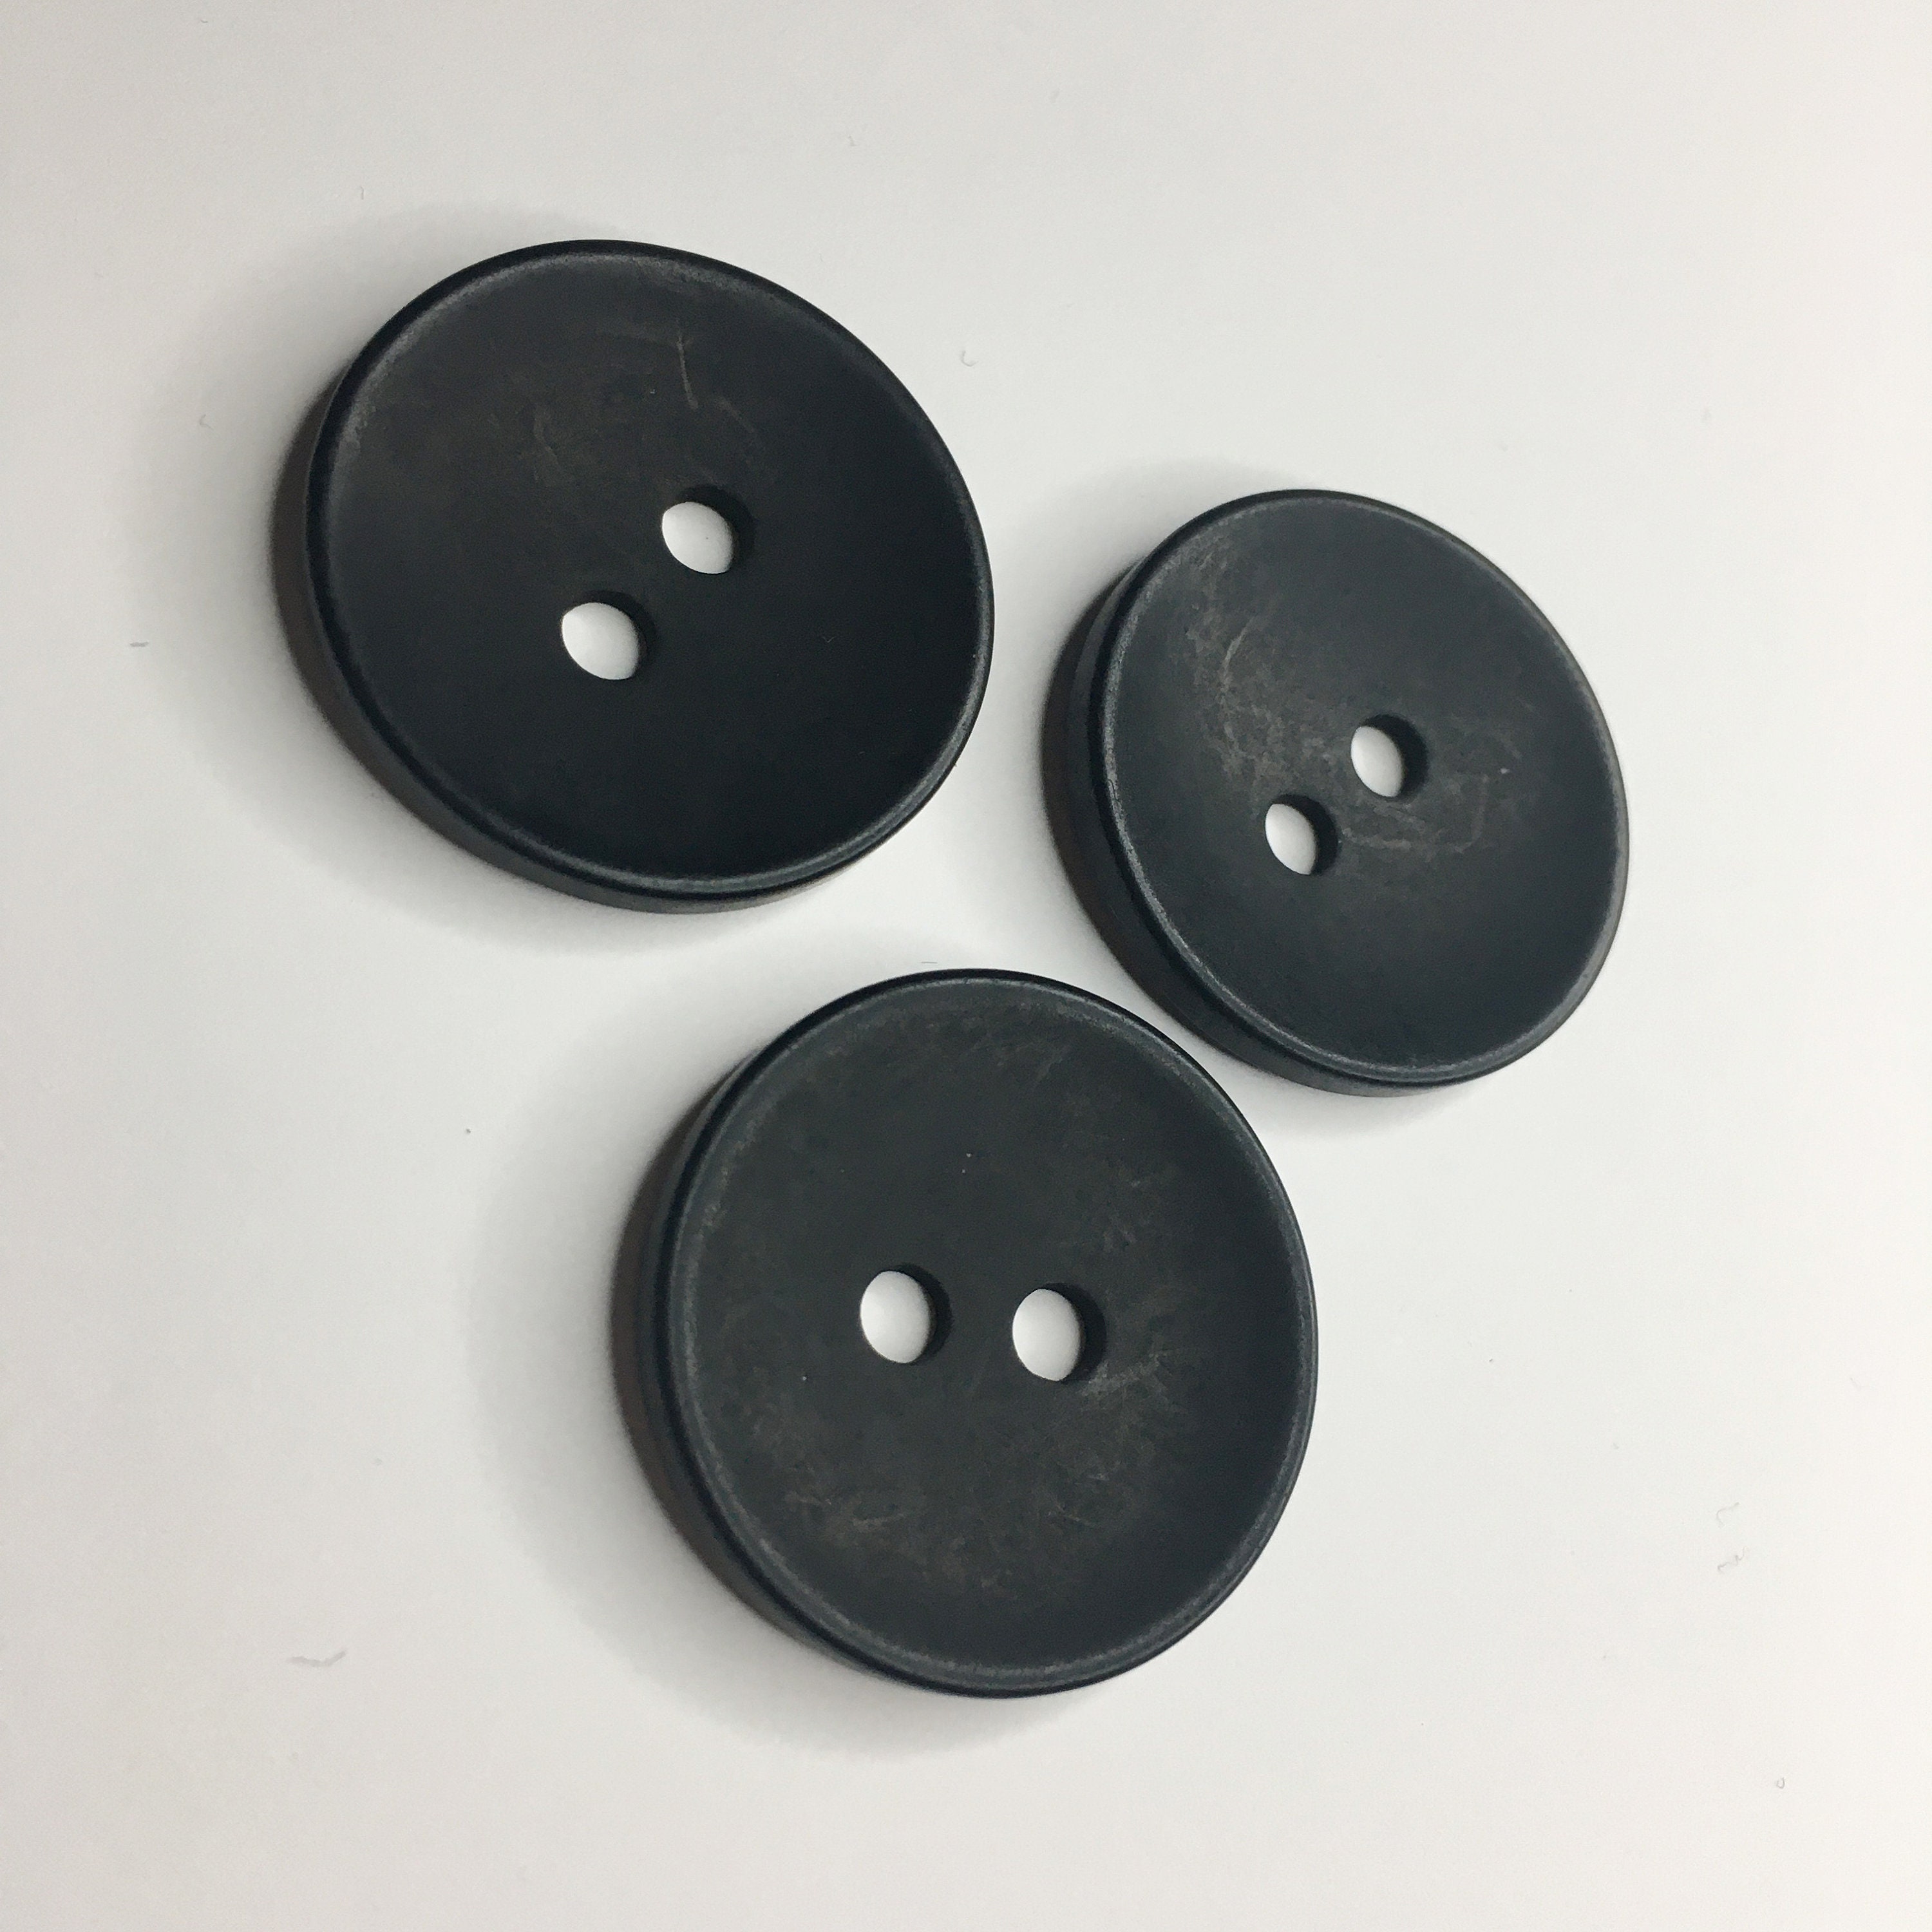 6, 25mm 40L Black Round Buttons, Buttons With Four Hole, Large Buttons,  Jacket Buttons, Coat Buttons, 1 Inch Buttons 